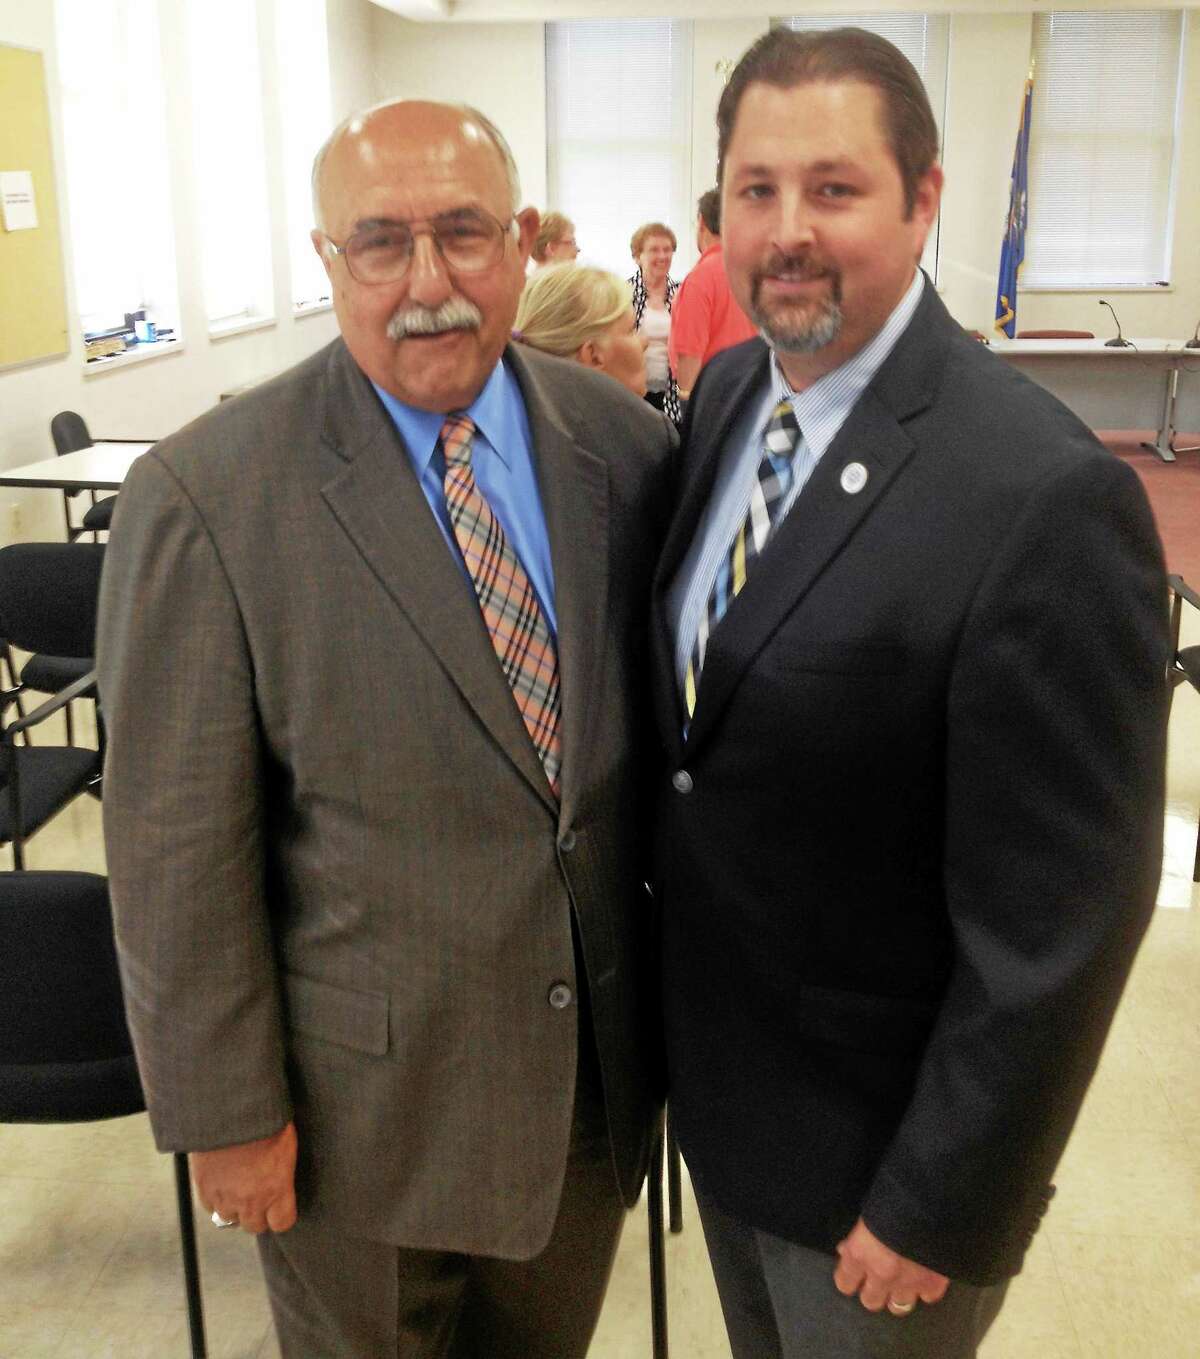 On Monday night, the Town Council voted to hire longtime Cromwell Police Chief Anthony Salvatore, left, as town manager. Here, he stands with Mayor Enzo Faienzo.